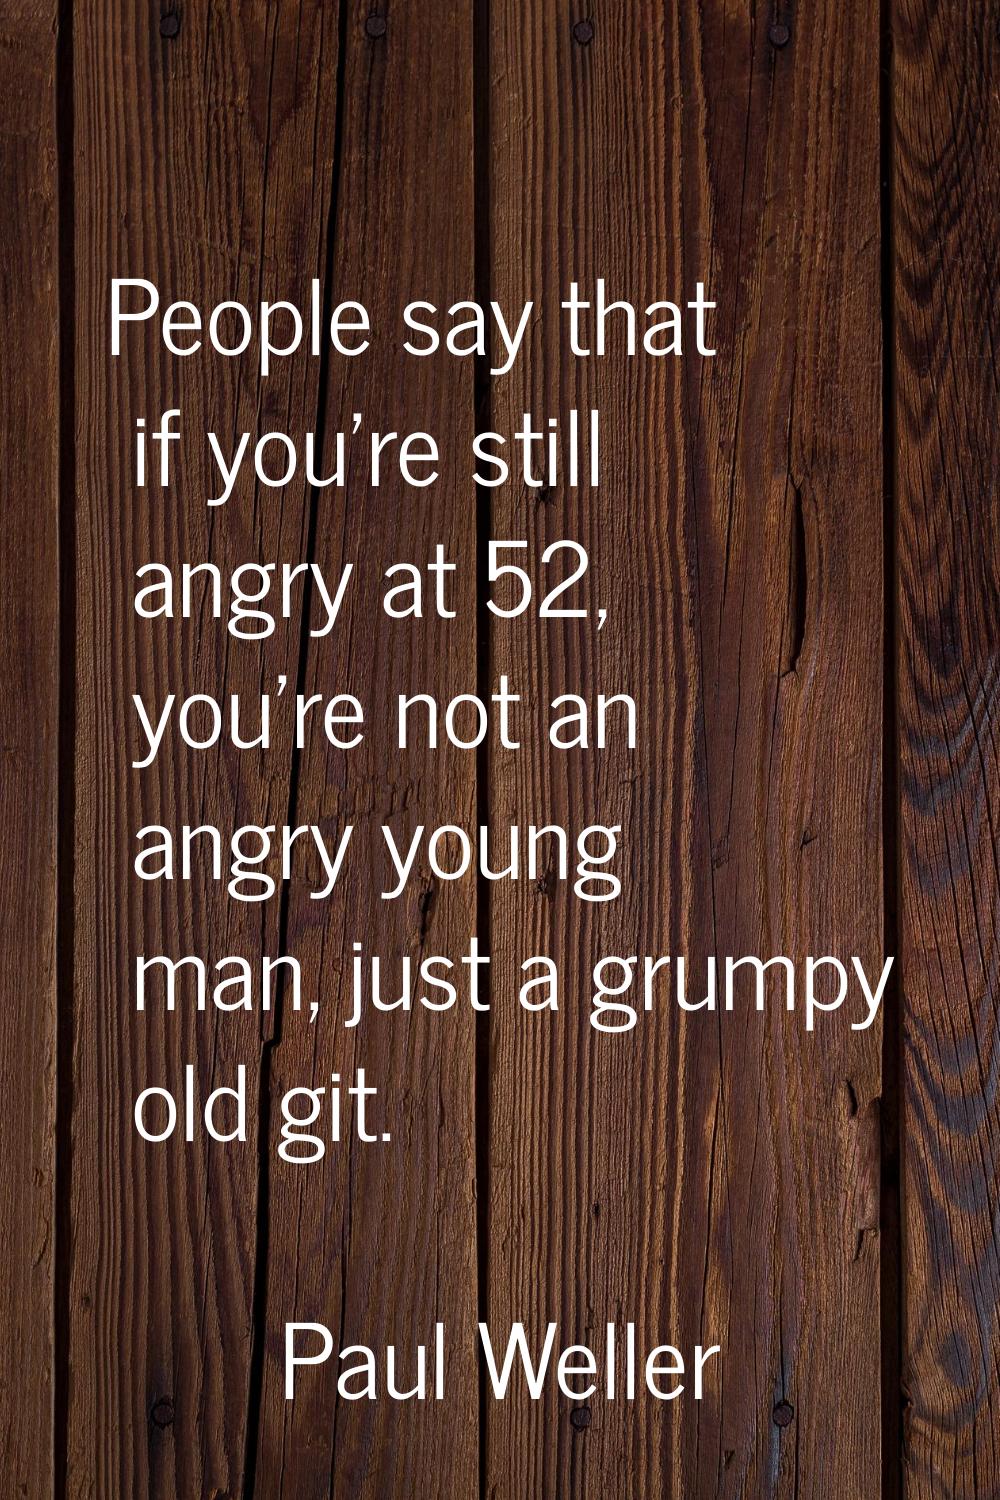 People say that if you're still angry at 52, you're not an angry young man, just a grumpy old git.